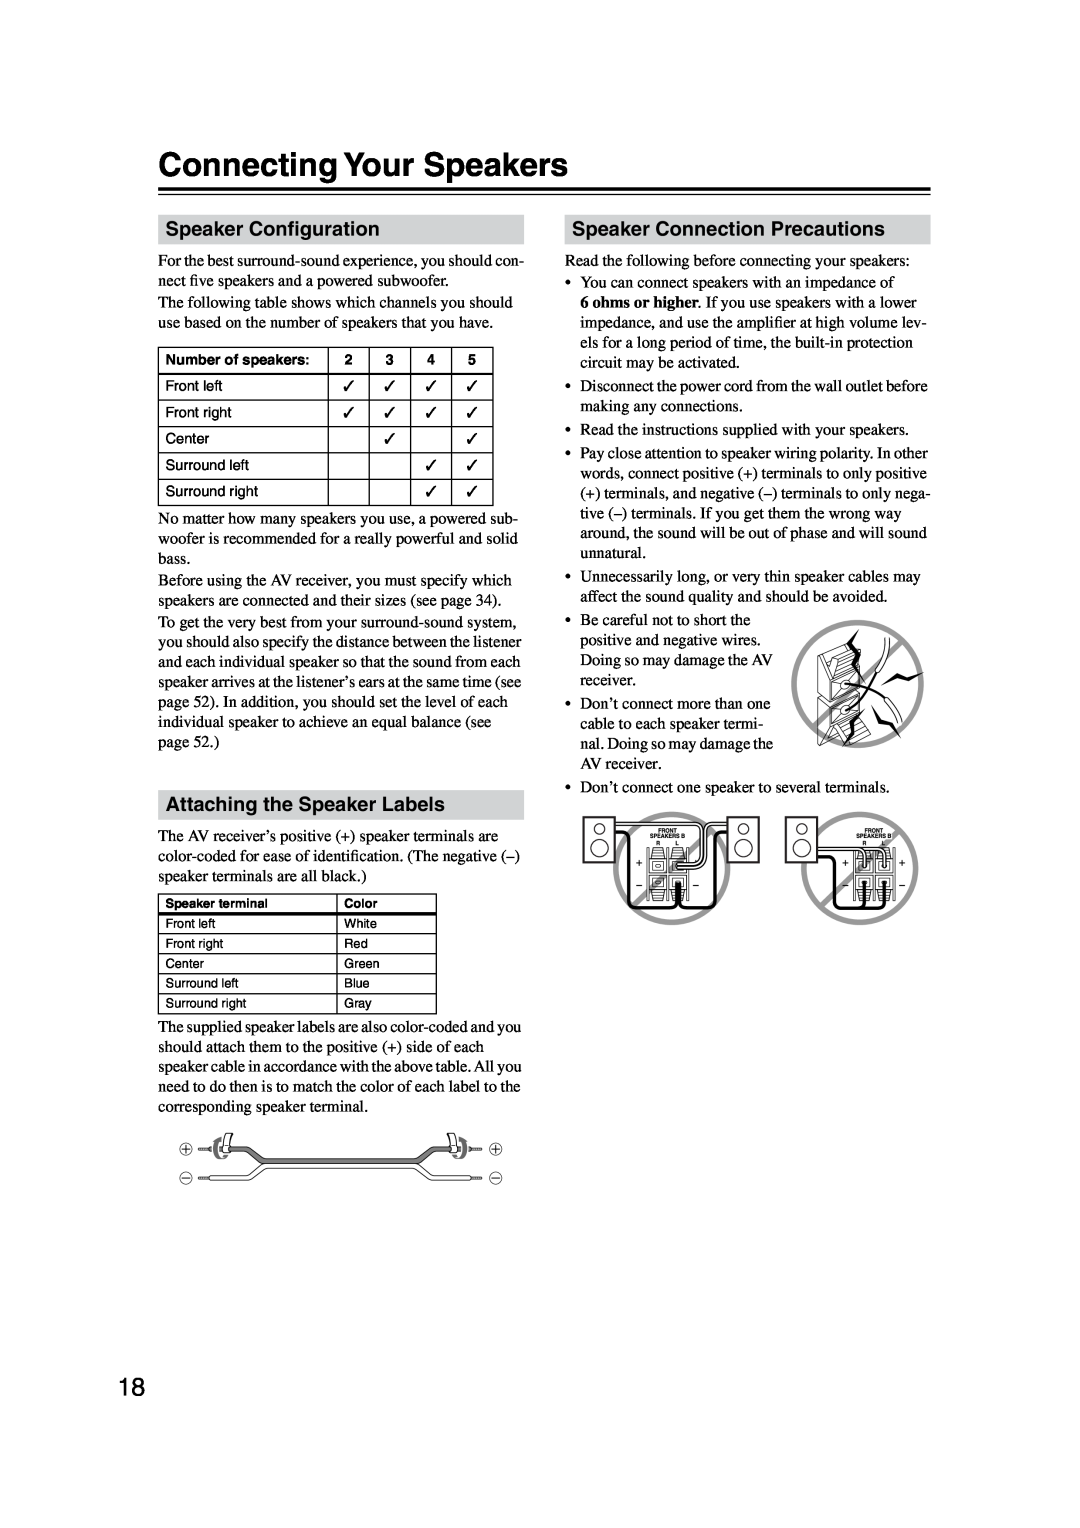 Onkyo TX-SR304 instruction manual Connecting Your Speakers, Speaker Conﬁguration, Attaching the Speaker Labels 